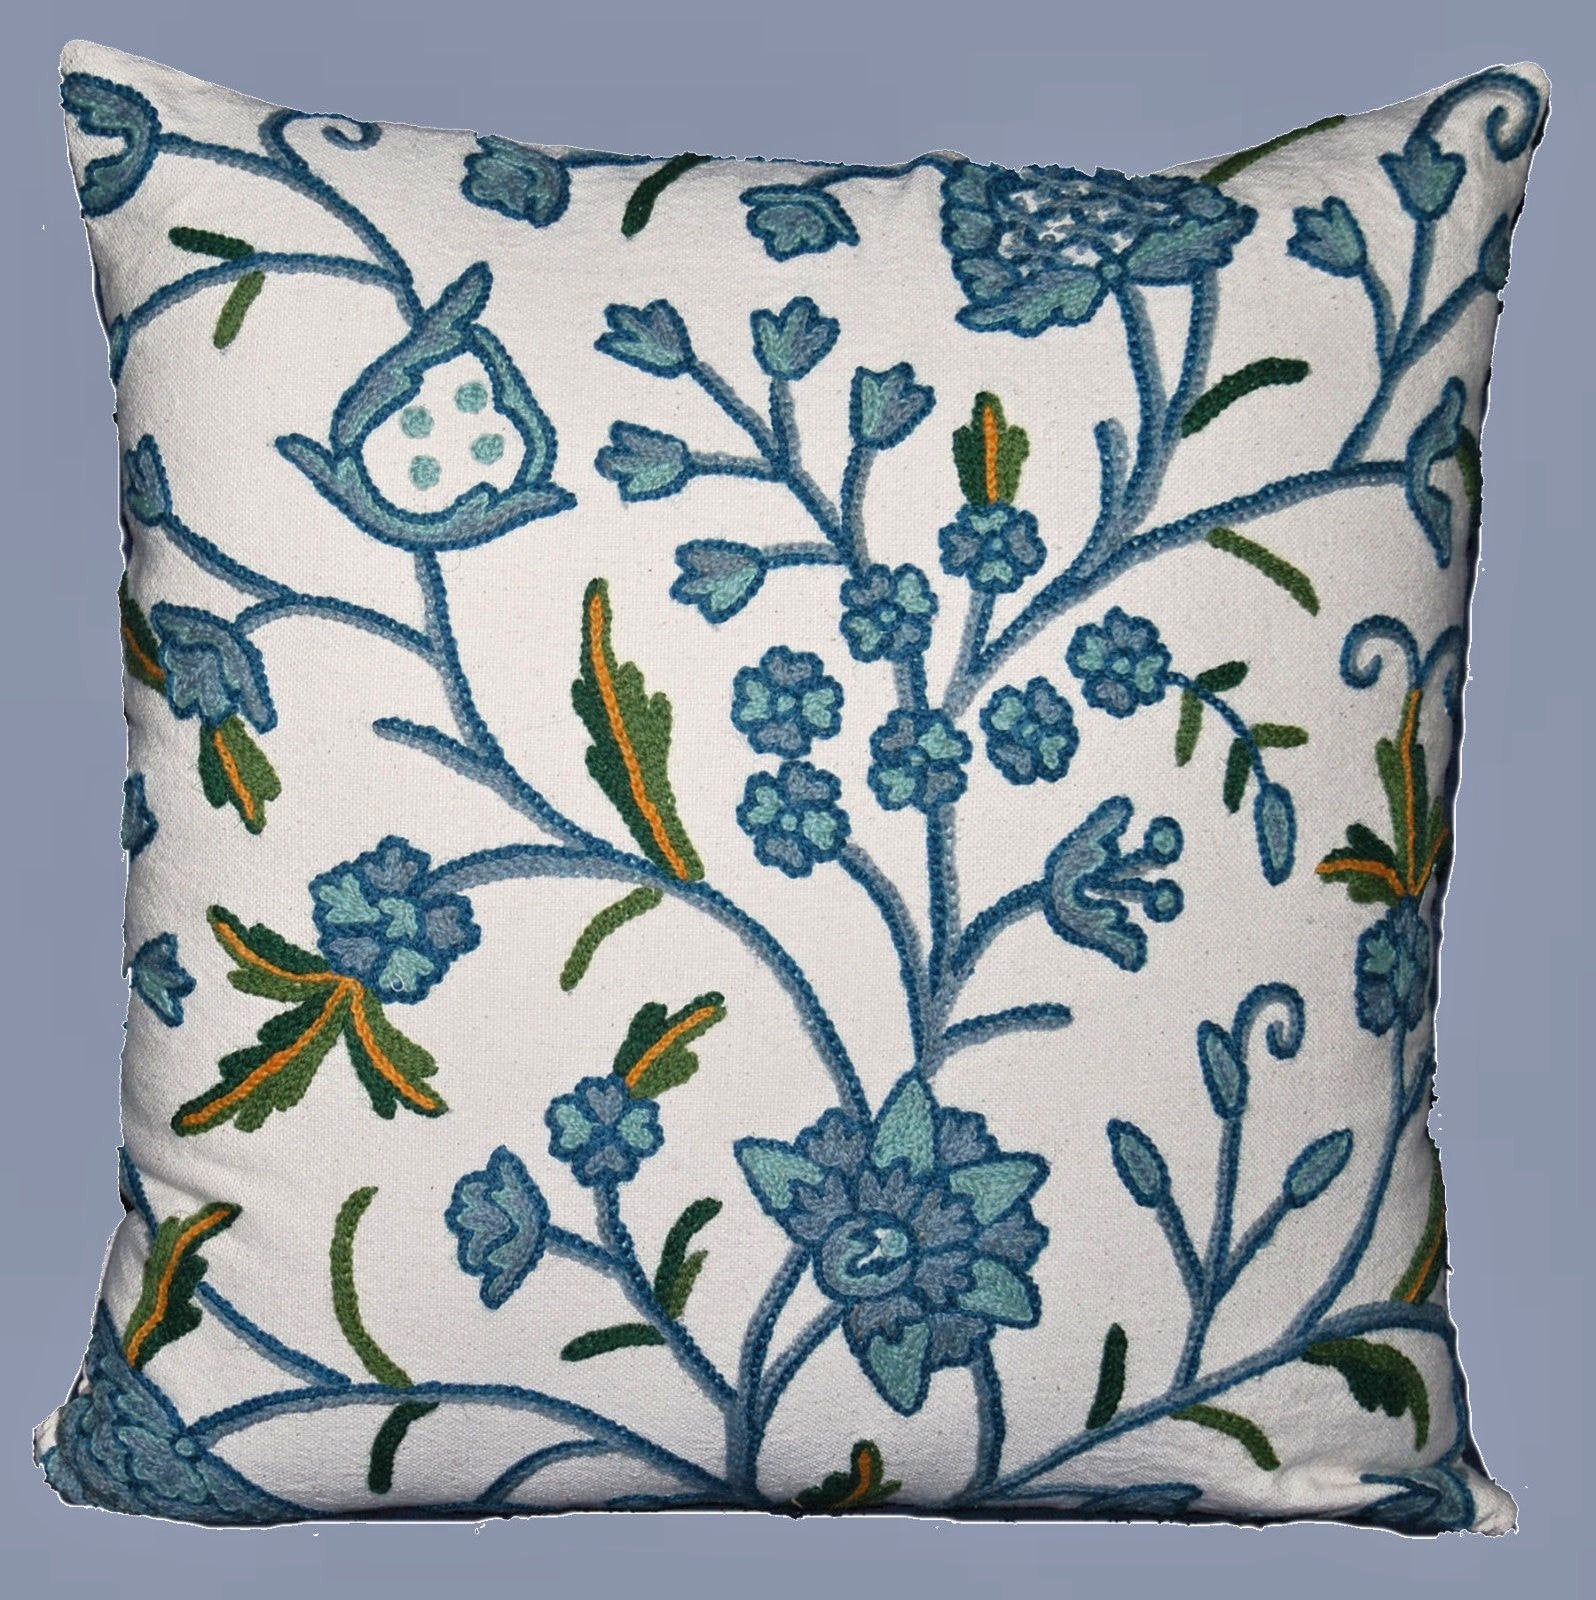 Crewel Embroidery Throw Pillow Cushion Cover "Tree of Life", Blue and Green #CW412